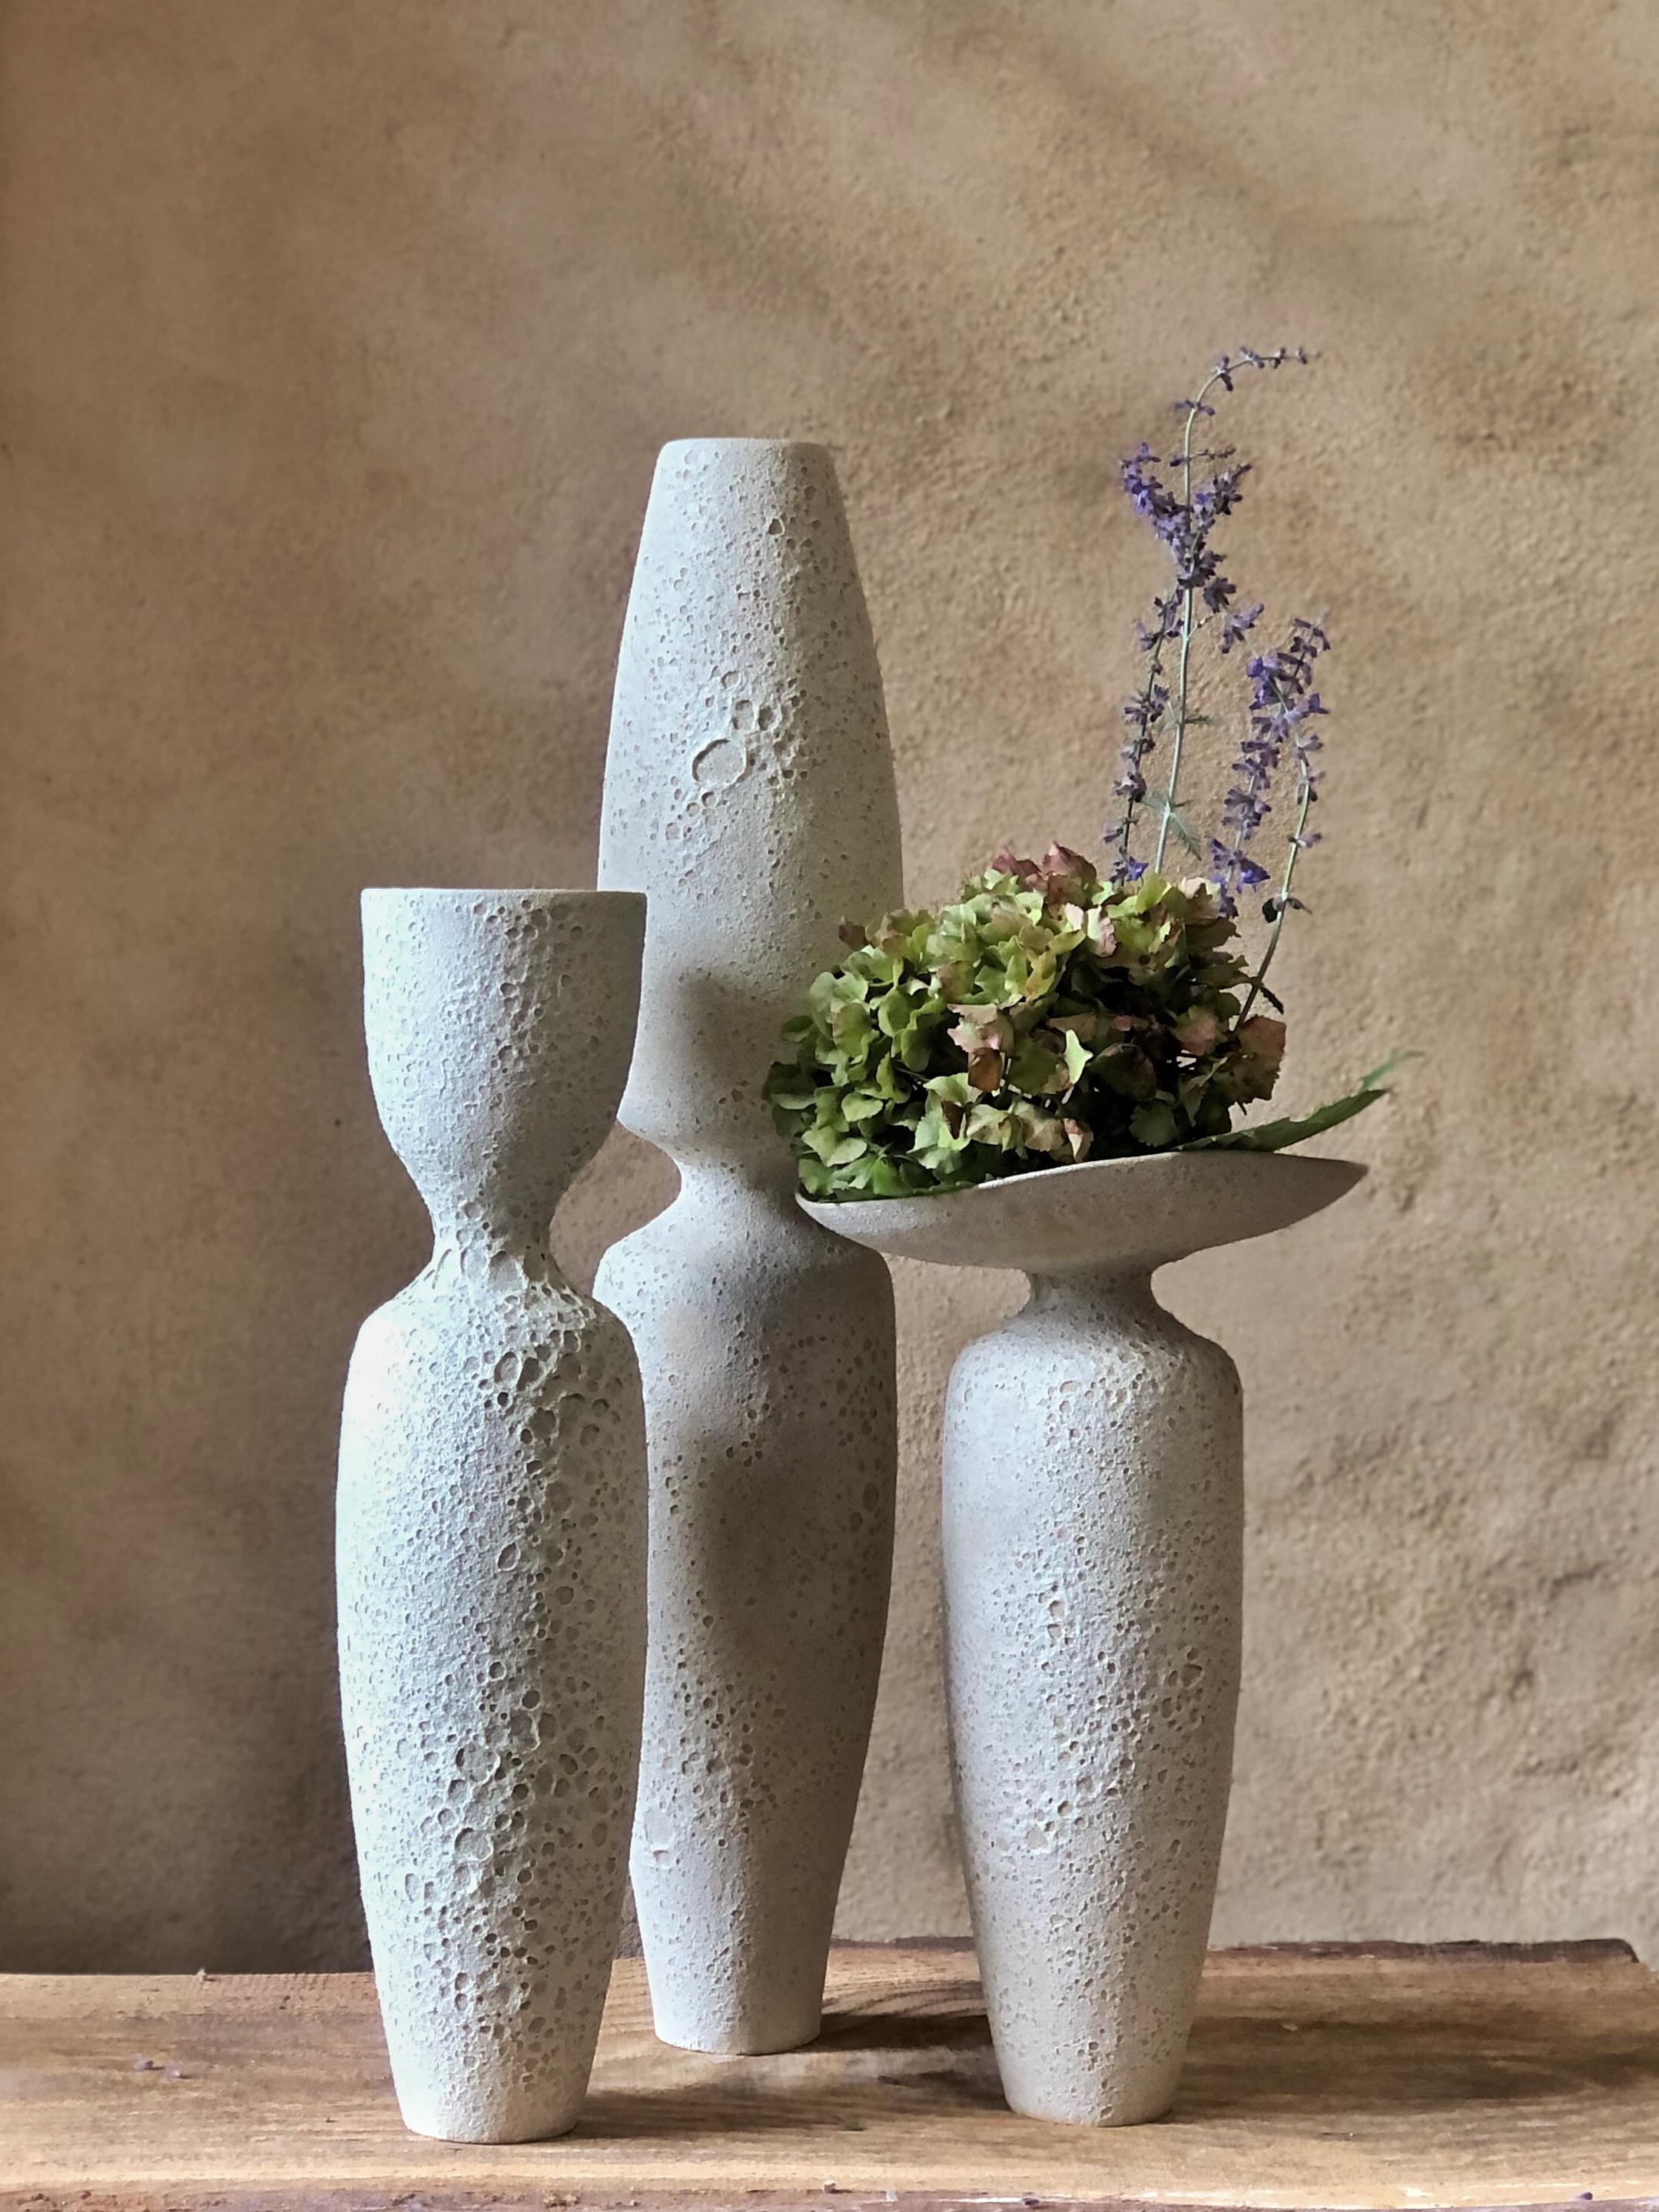 Set Of 3 Crater Vases by Sophie Vaidie
One Of A Kind.
Dimensions: High Crater Vase: Ø 11 x H 60 cm. 
Corolla Crater Vase: D 15,5 x W 21,5 x H 35 cm. 
Cup Crater Vase: Ø 10 x H 43 cm. 
Materials: Beige stoneware with crater glaze.

In the beginning,